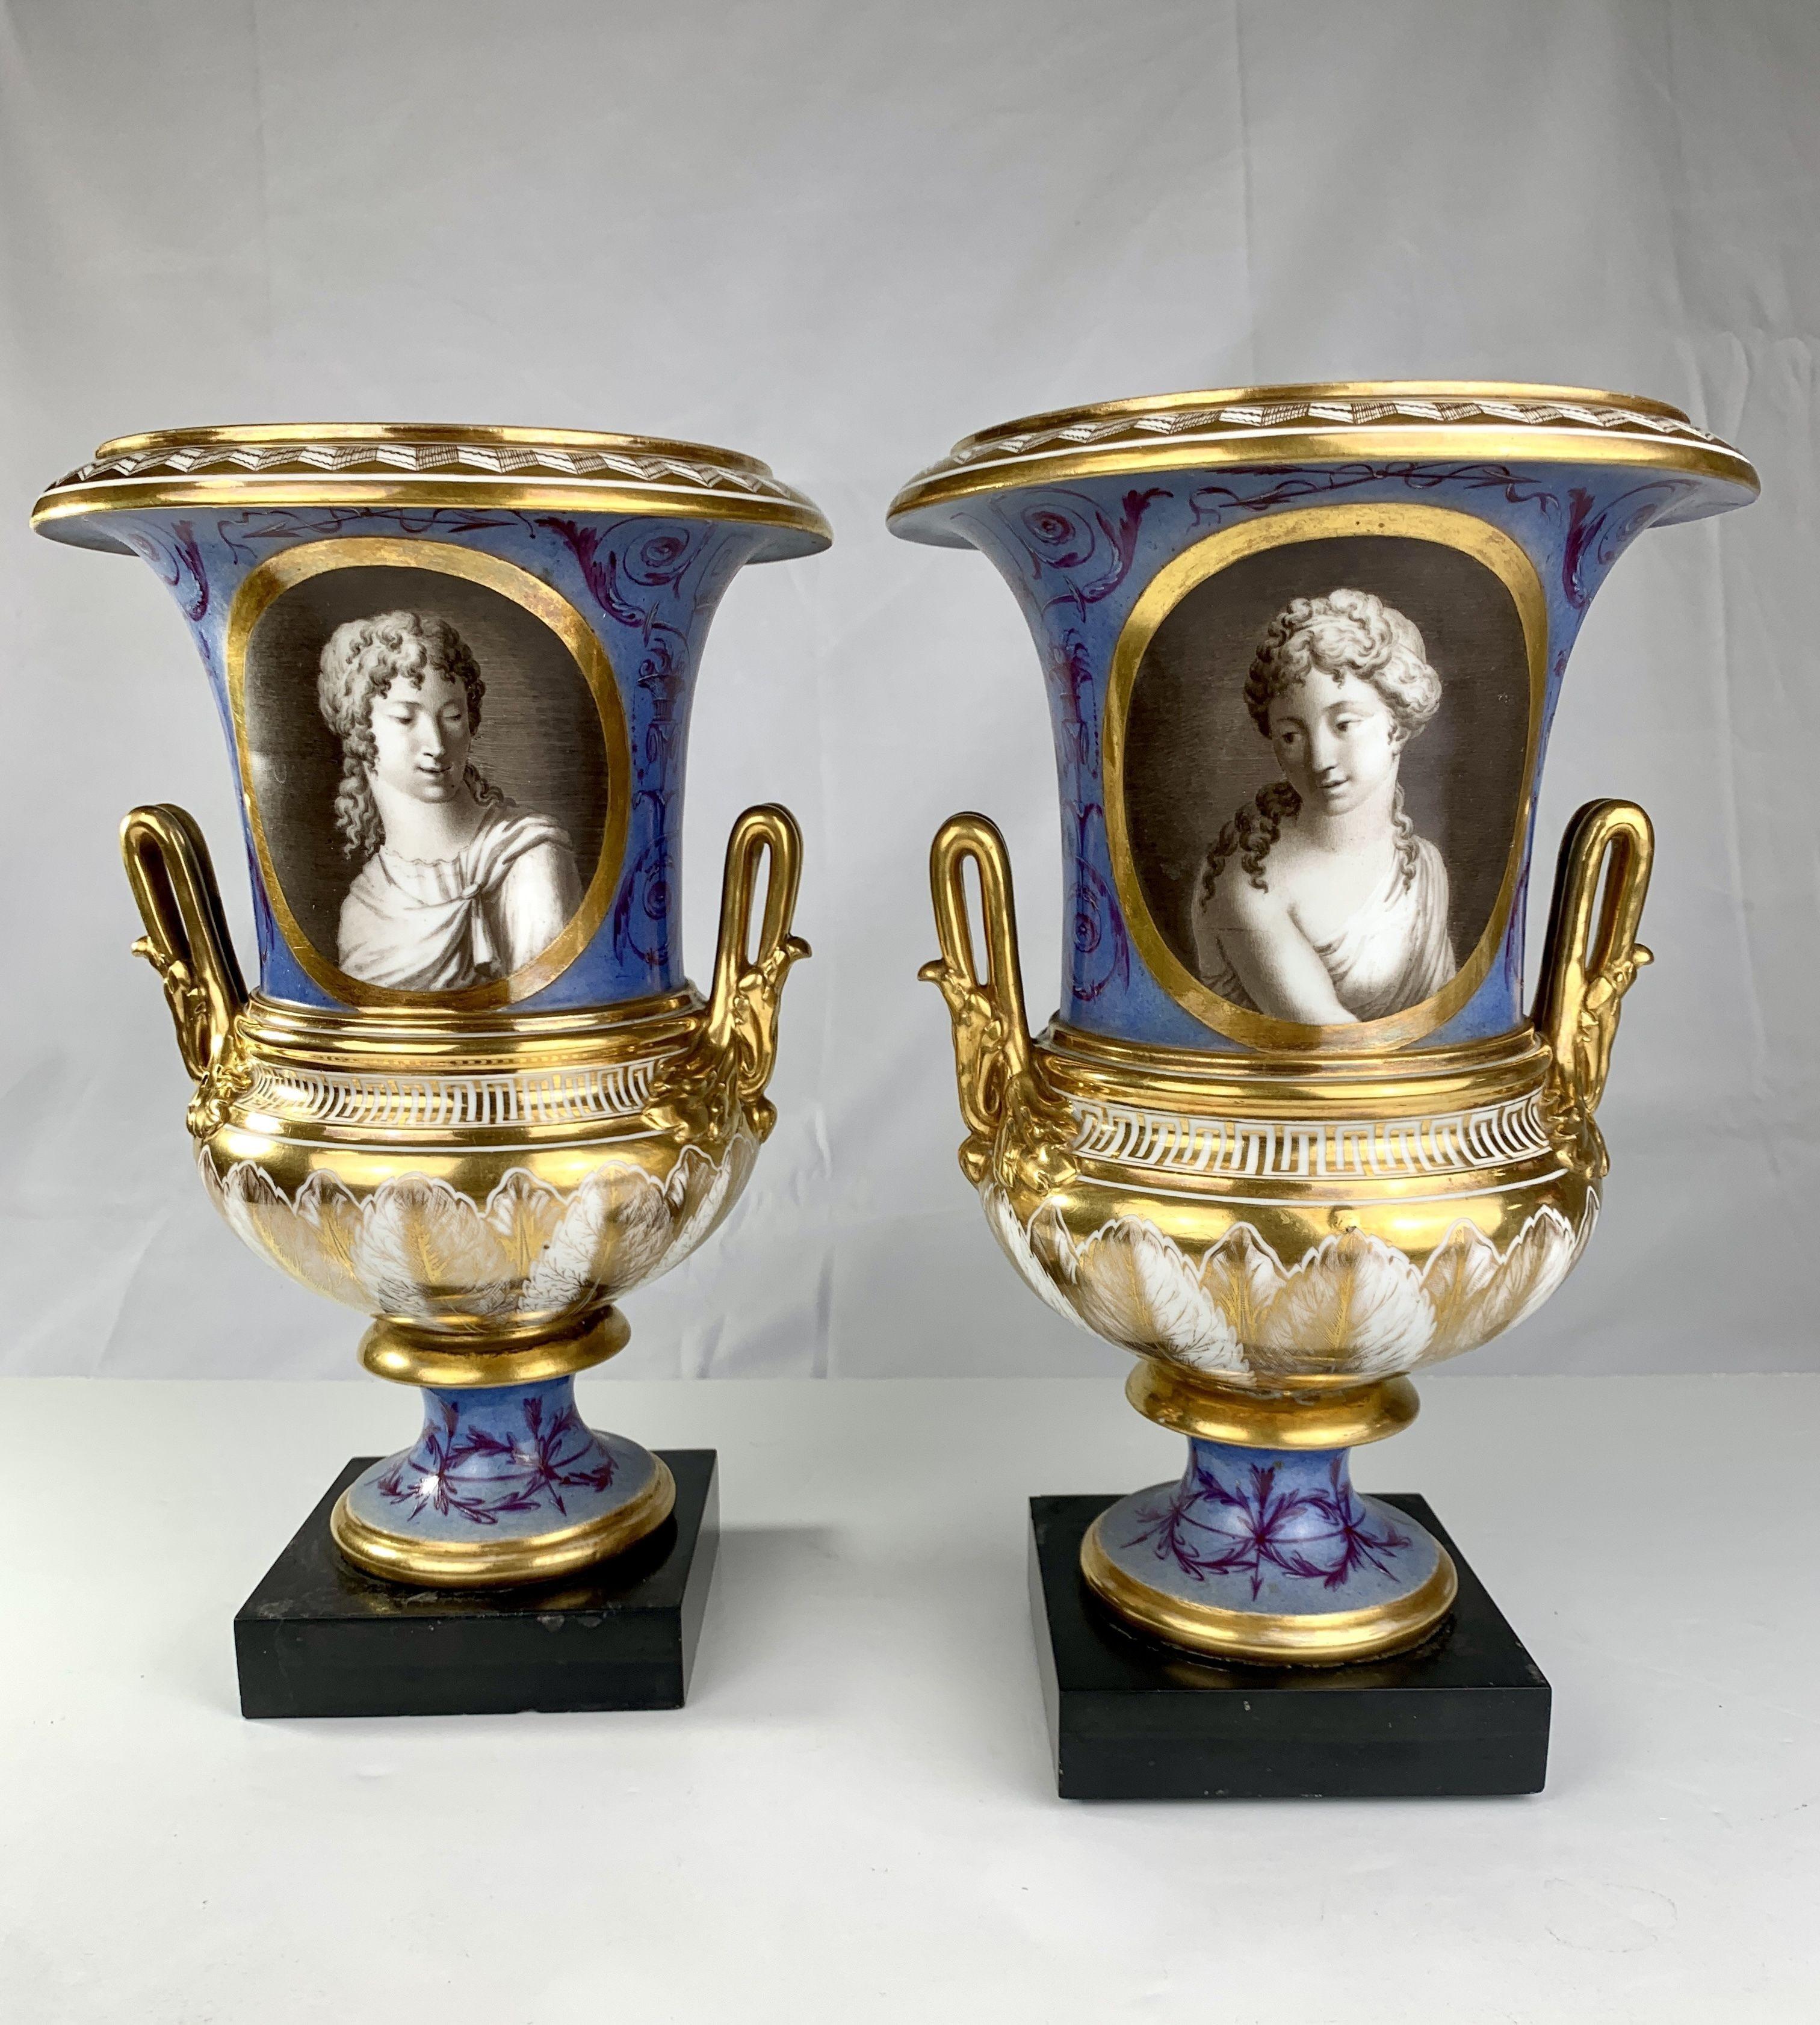 This pair of portrait vases with Roman figures was made in early 19th-century France. 
The exquisite execution of the classical portraits is immediately appealing. 
They connect with the viewer as if they were alive. 
Painted in grisaille and framed